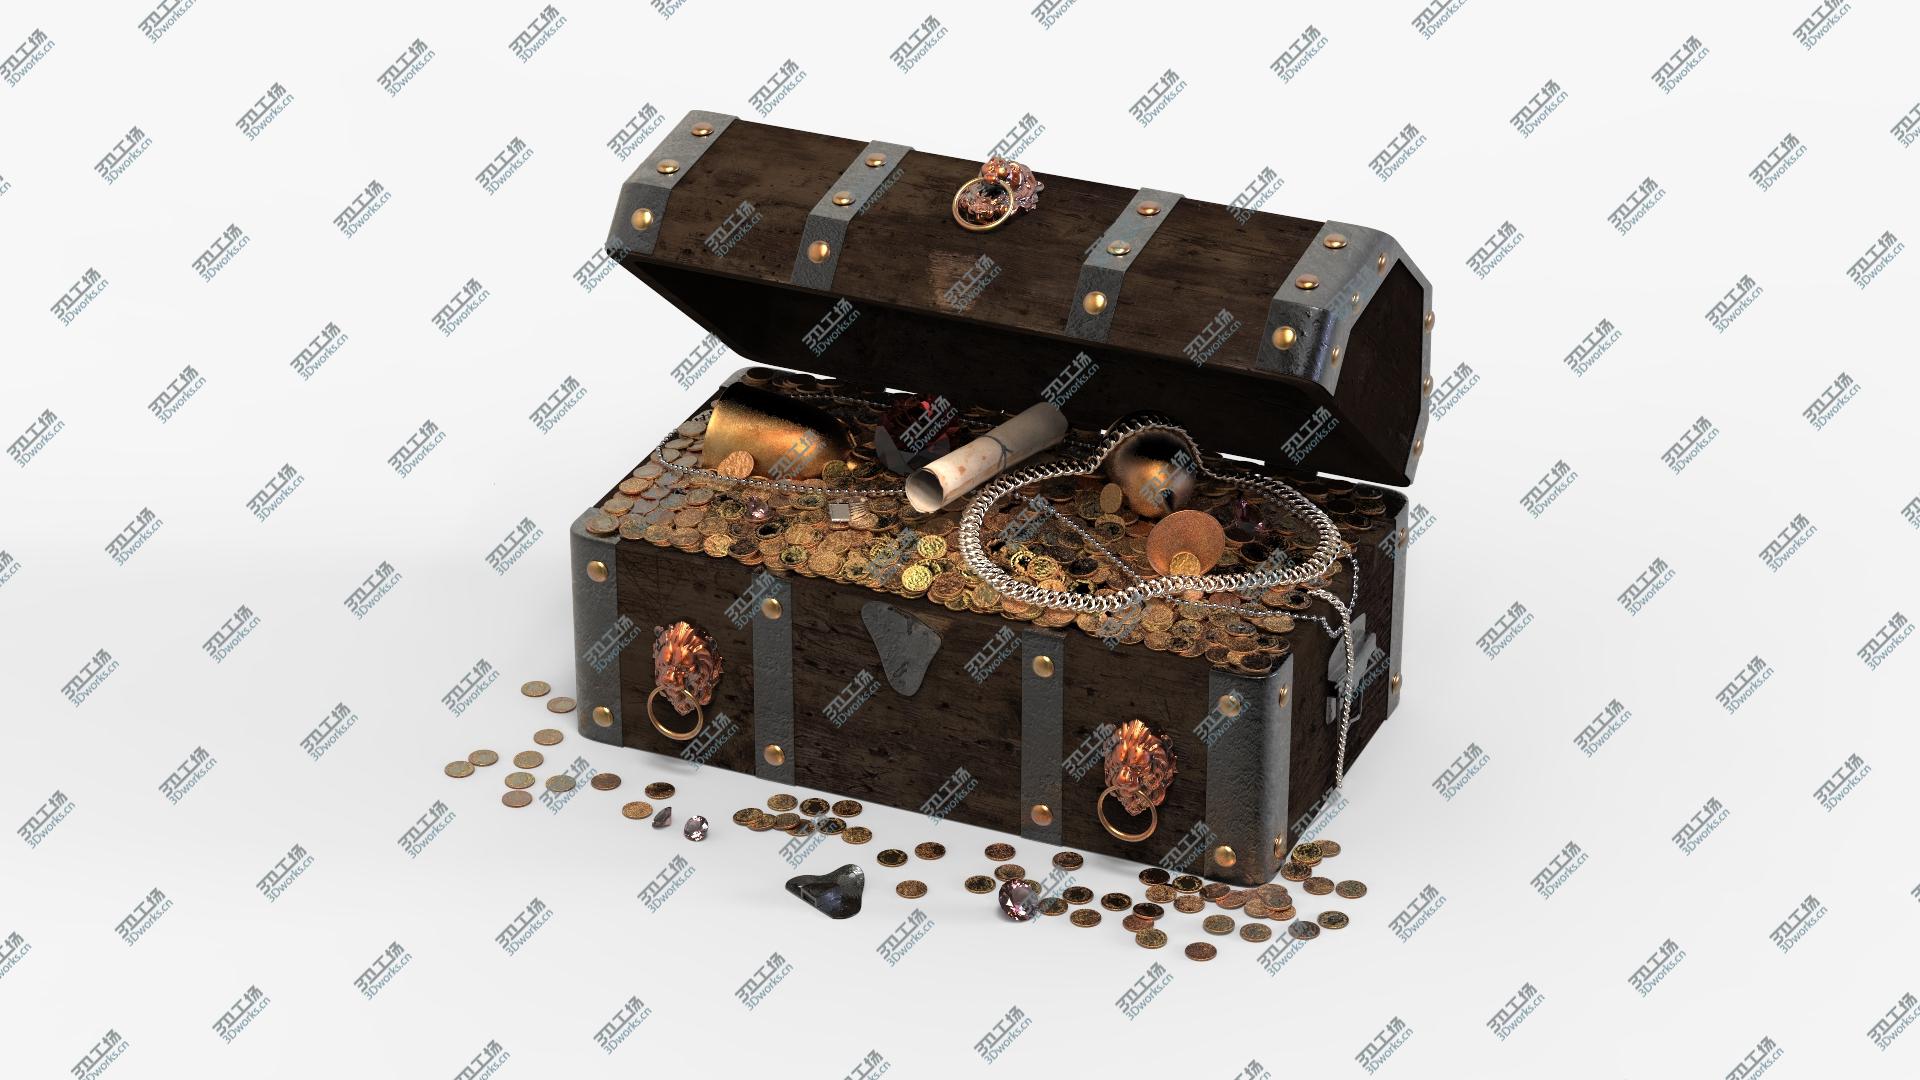 images/goods_img/202104093/3D Chest Treasure With Loot model/3.jpg